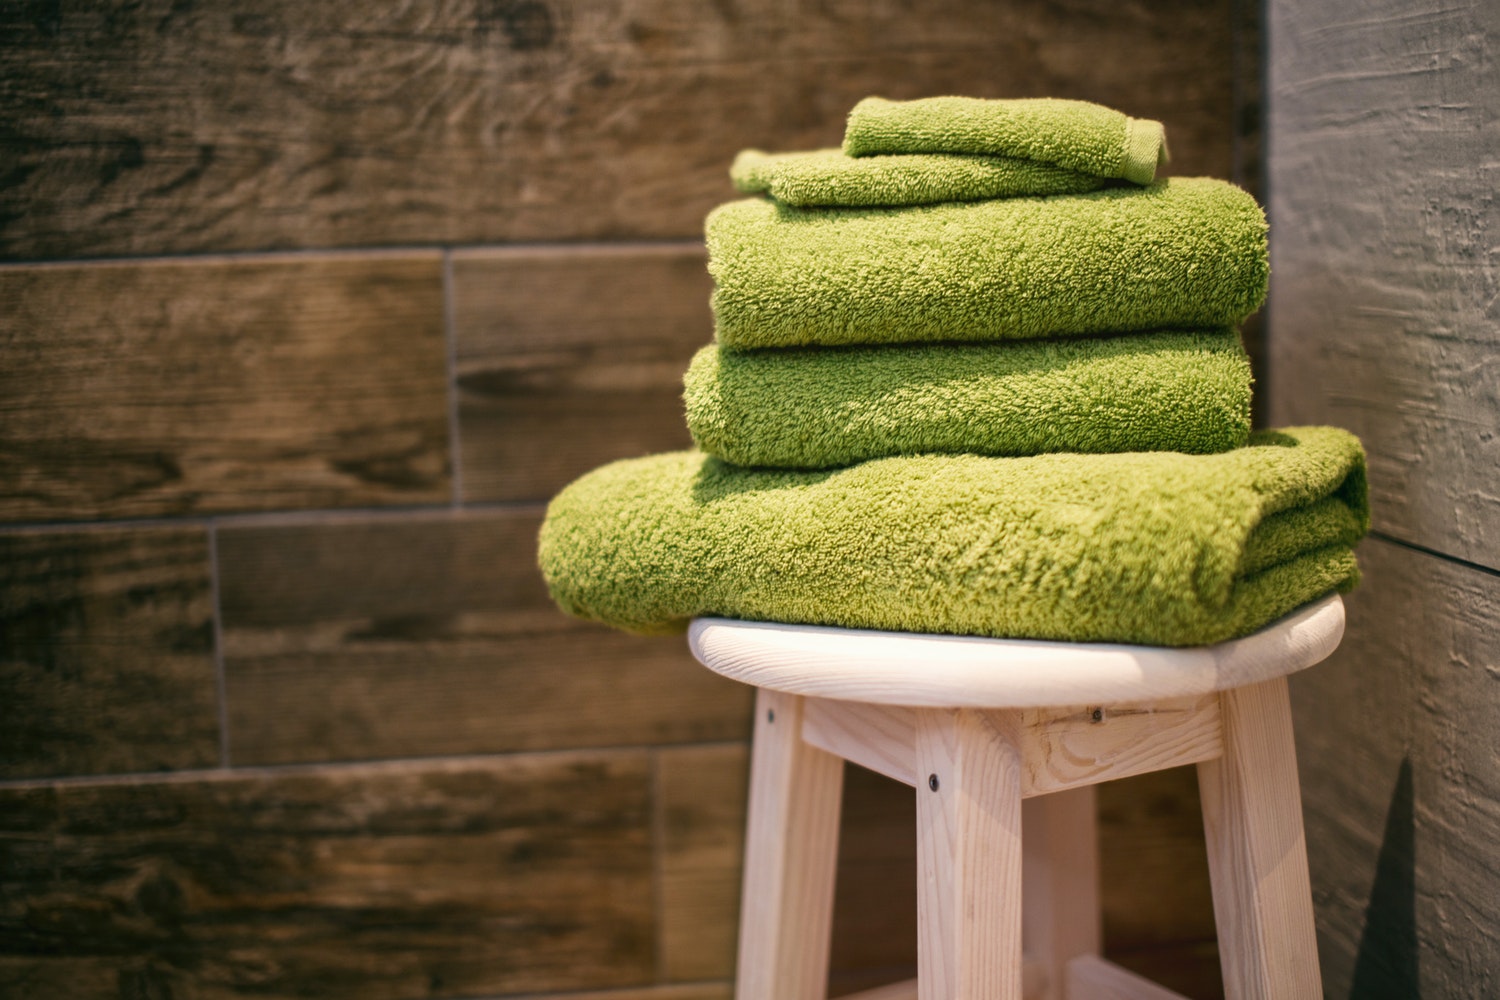 Luscious Pampering Towels and Amenities